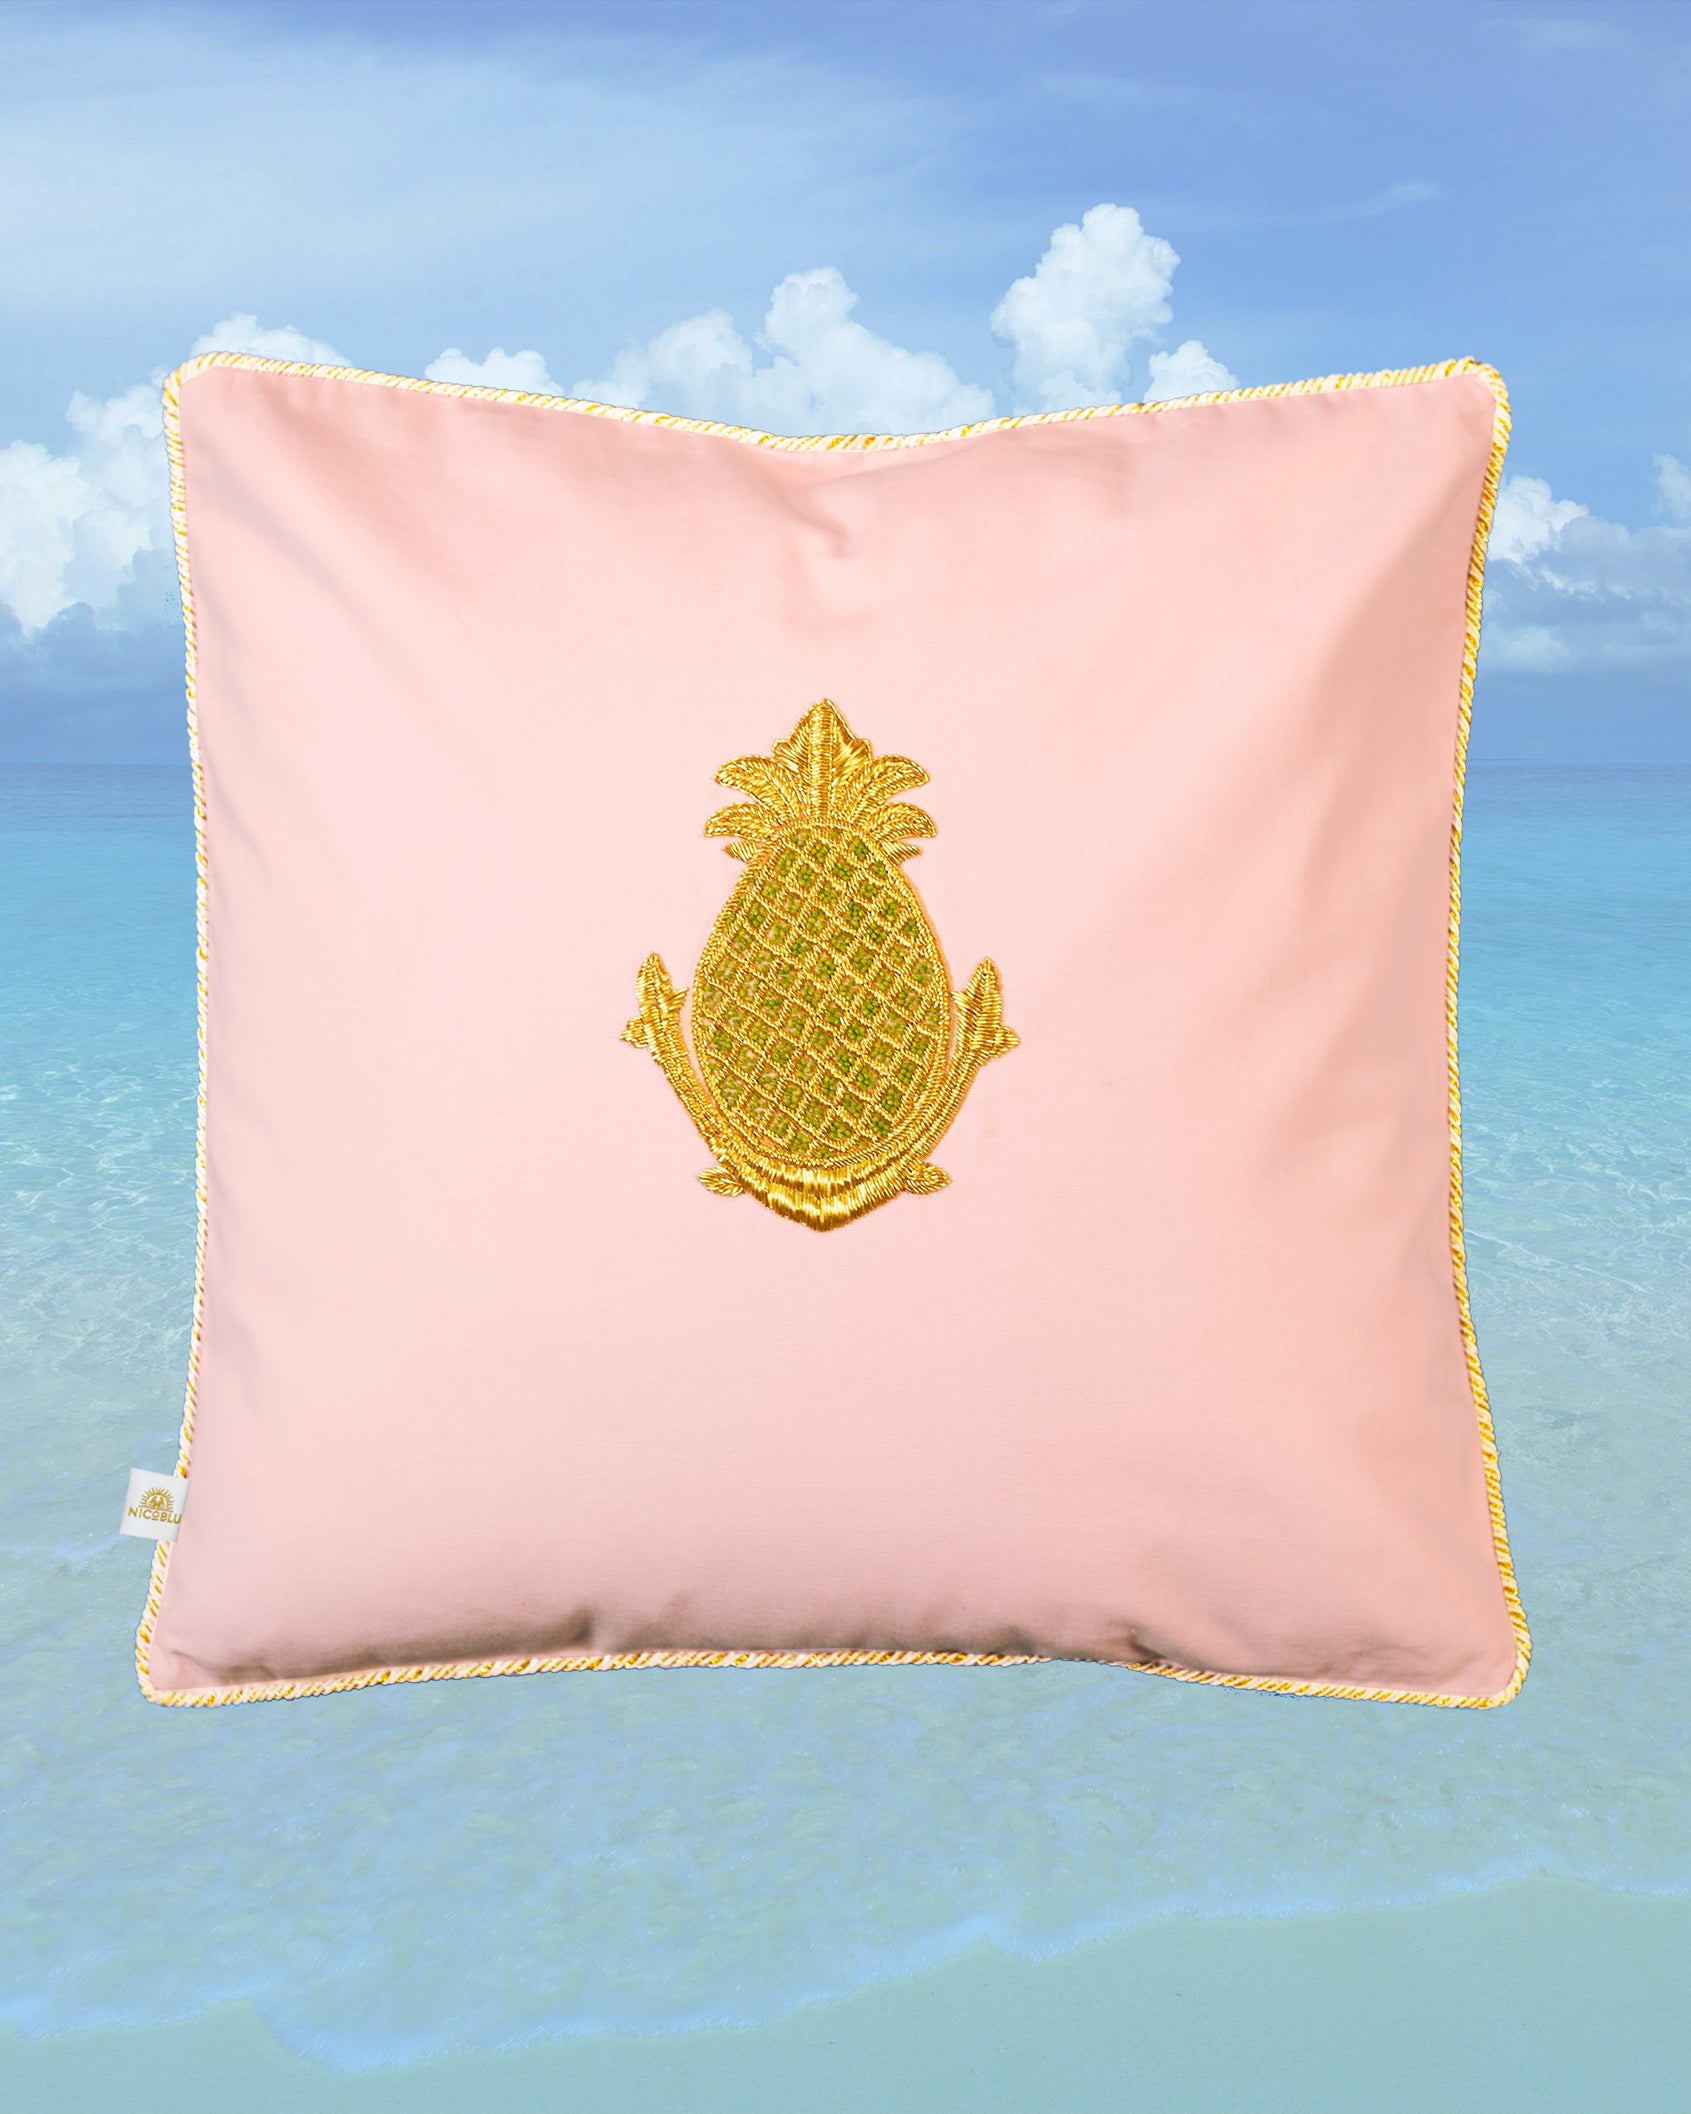 Palm Beach Pillow Embellished with Pineapple Motif